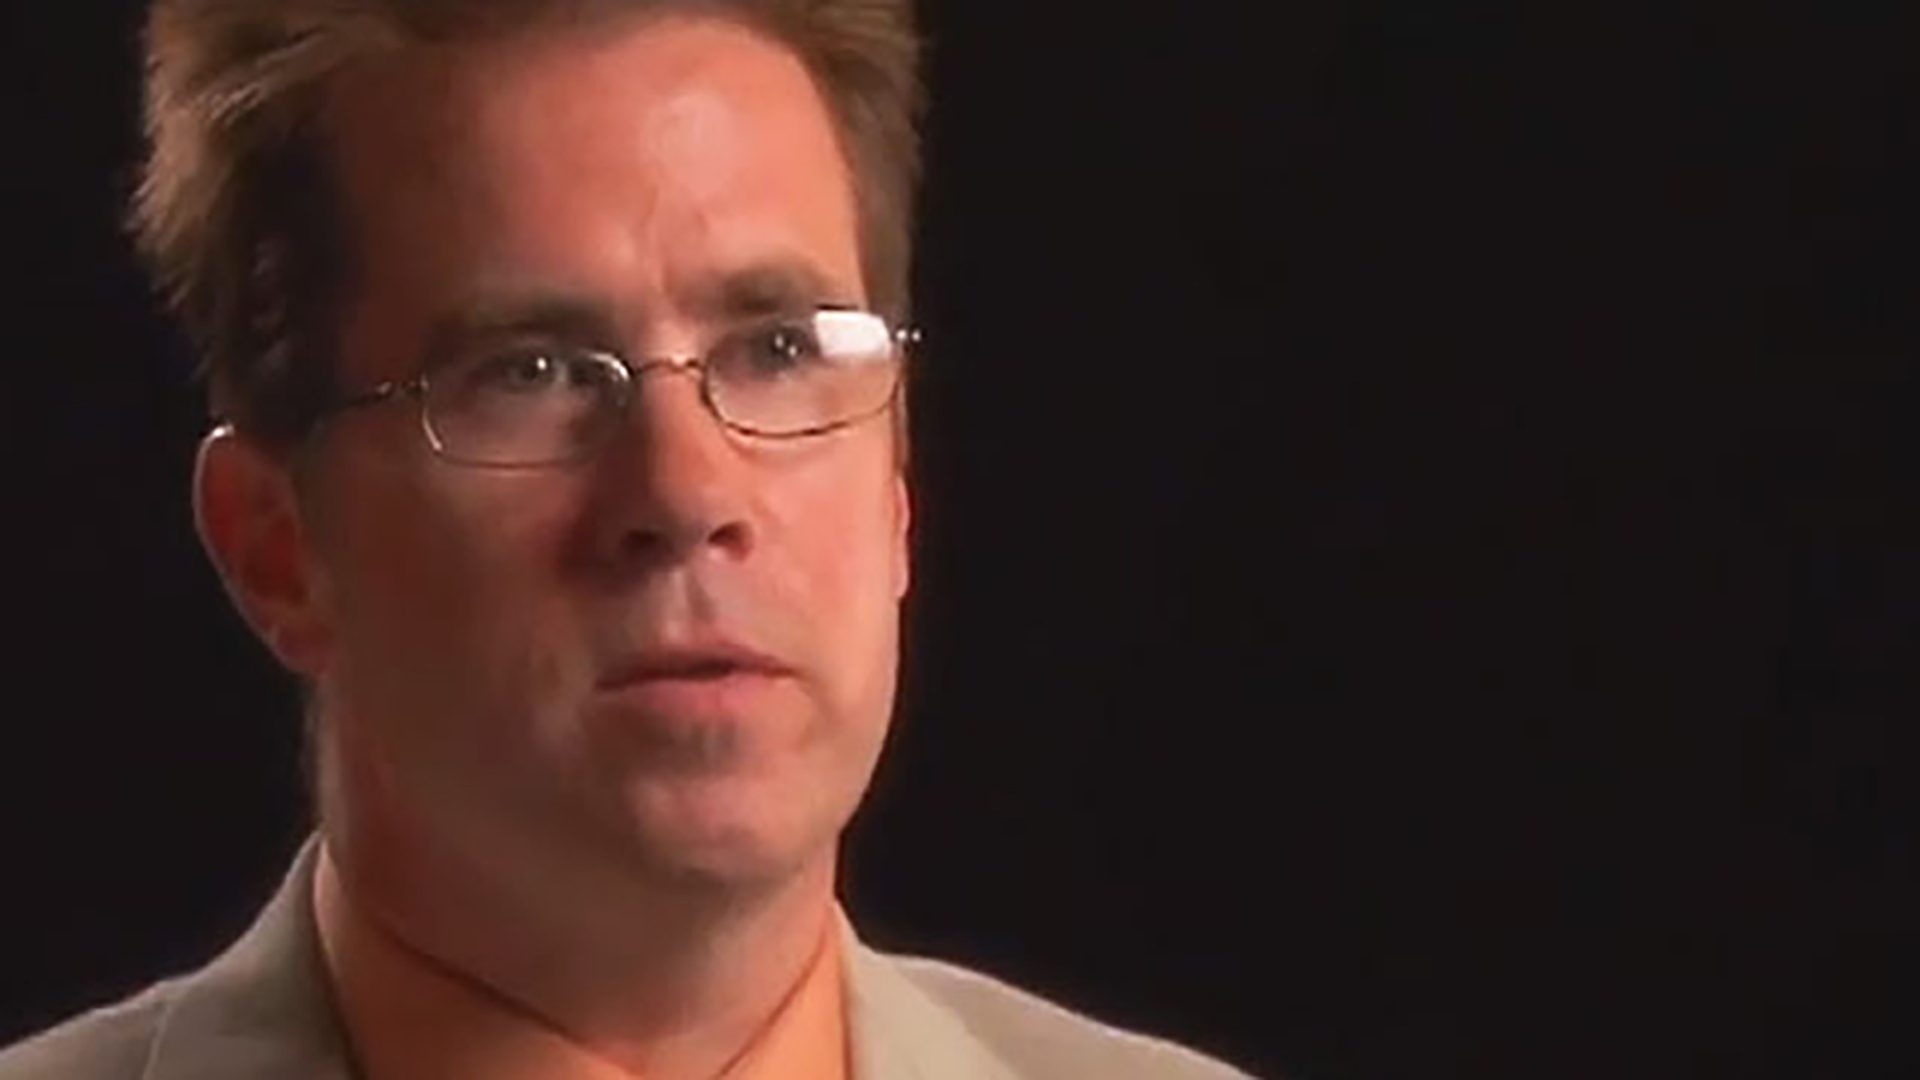 A man with glasses is interviewed against a black background